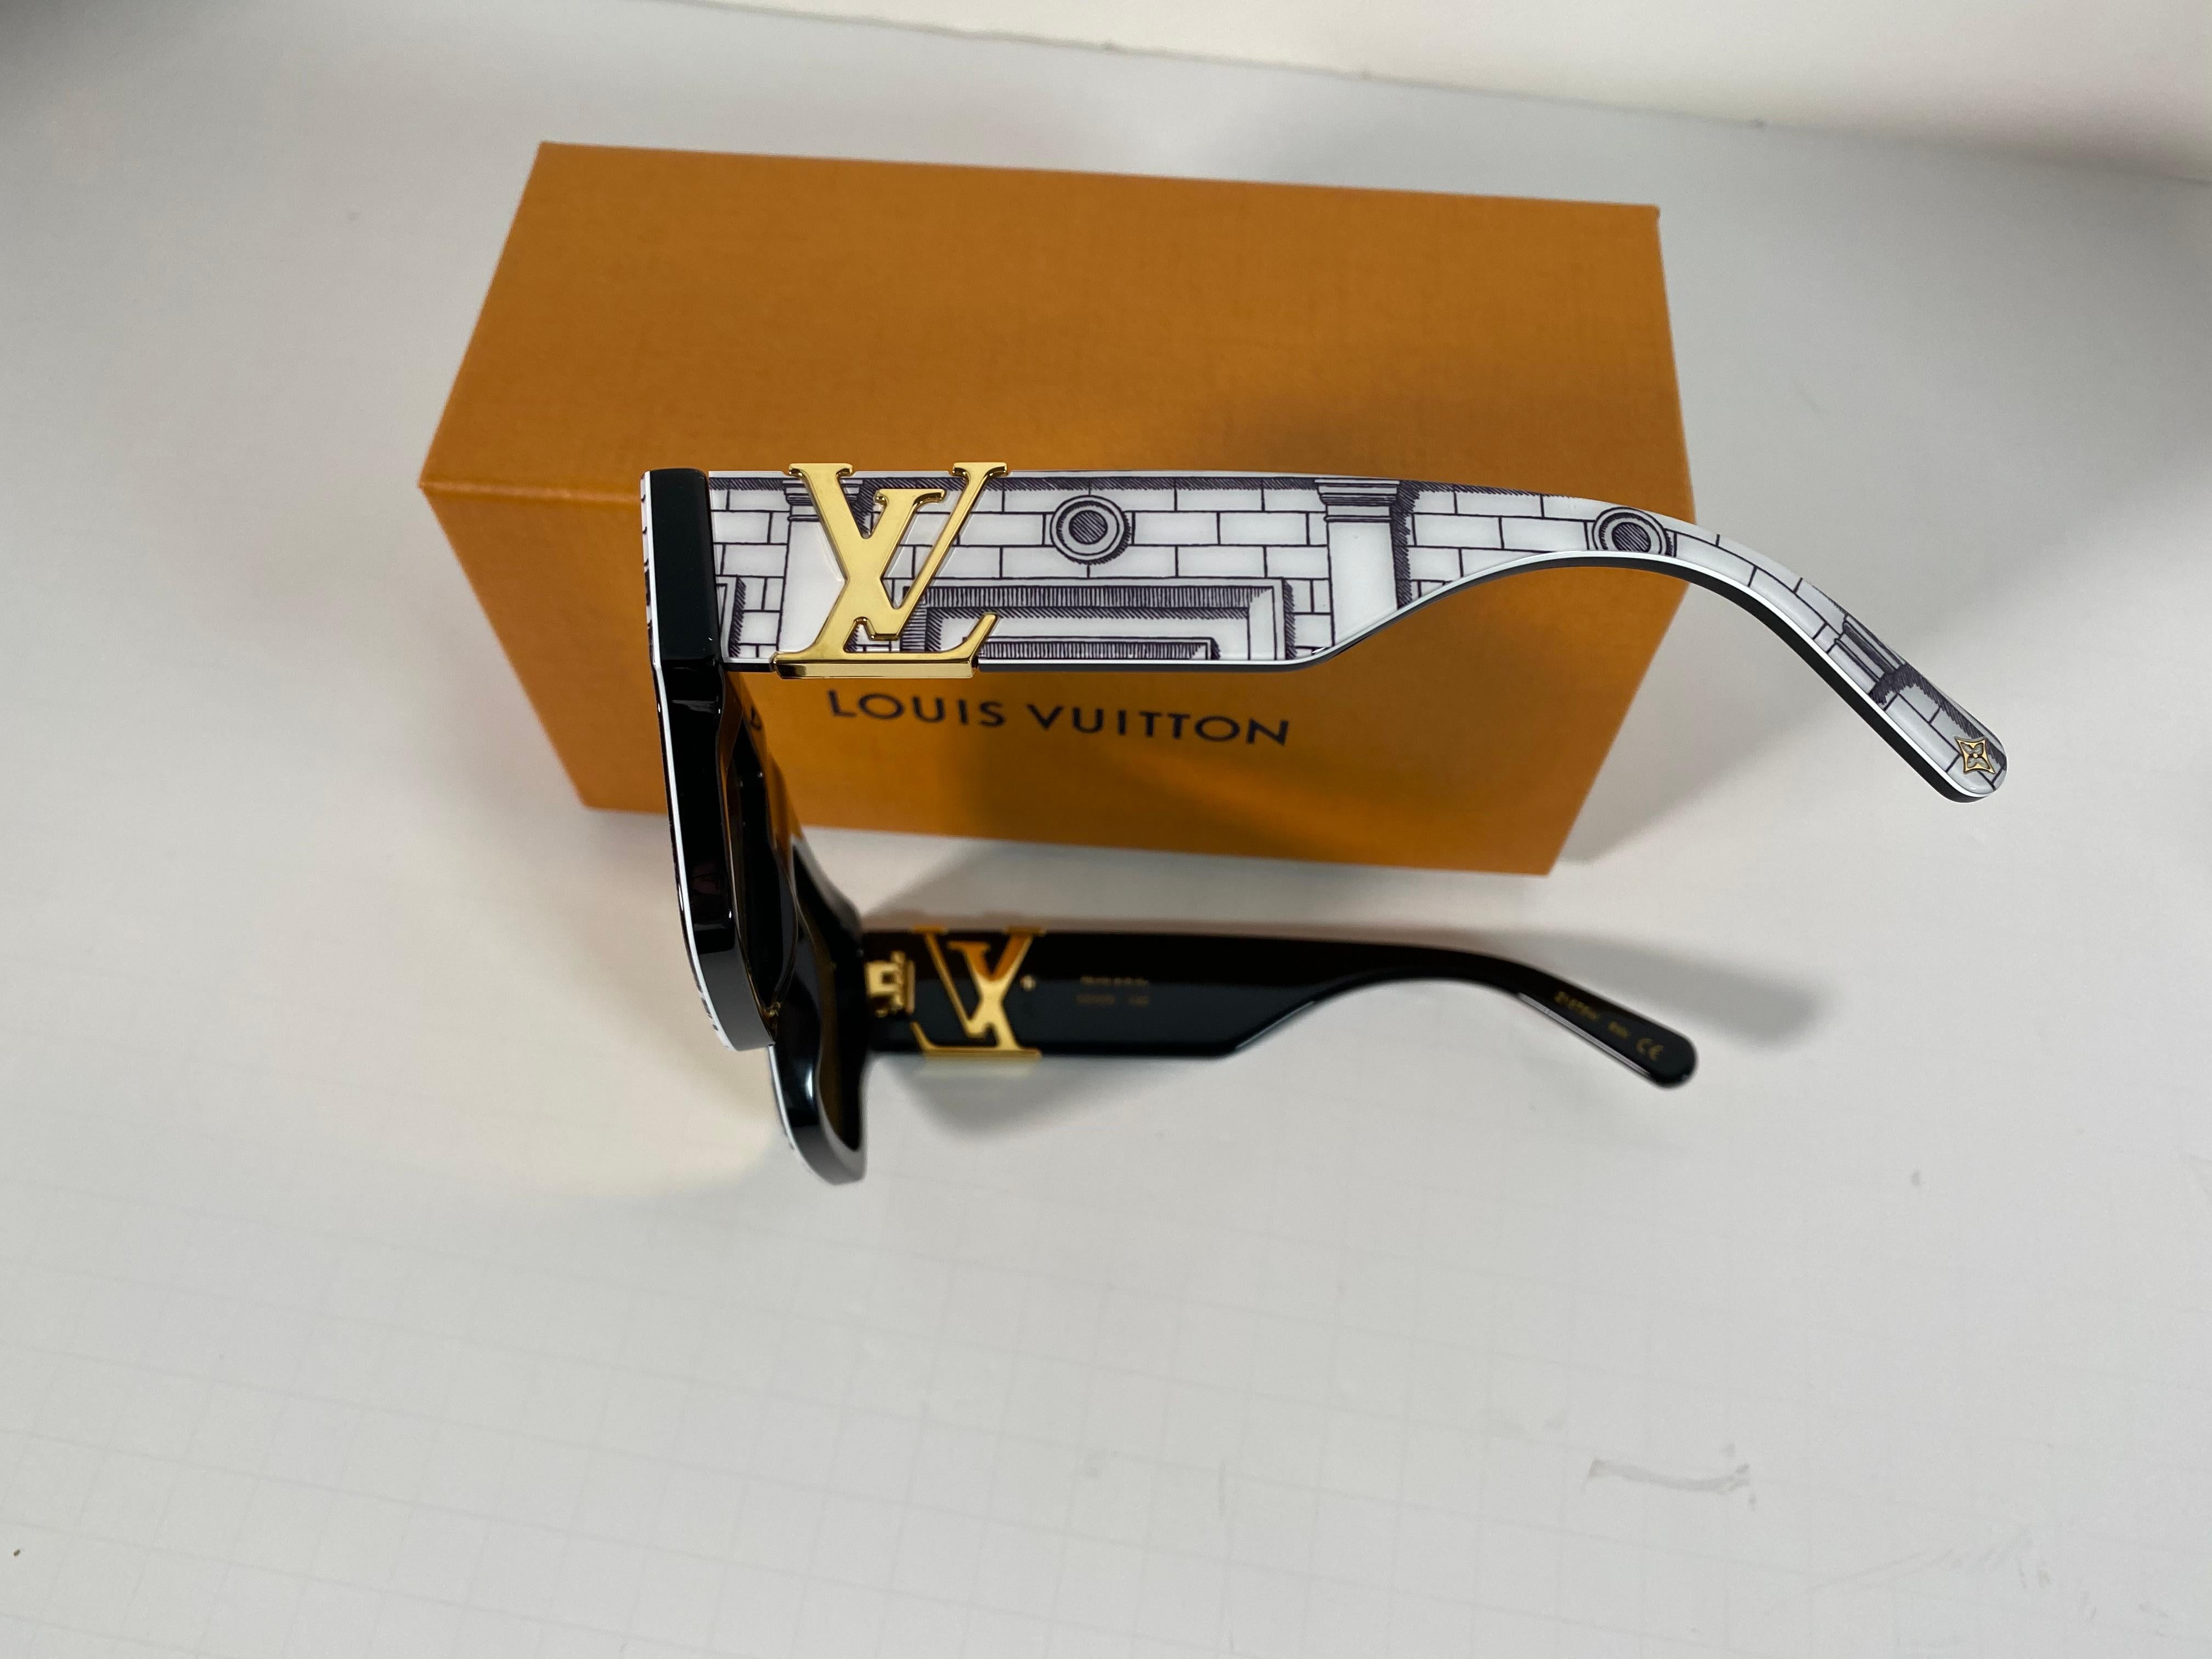 100% authentic guaranteed 
LOUIS VUITTON X Fornasetti Collaboration SunglassesThese LV sunglasses echo the theme from the Fall-Winter 2021 Collection. This iconic House design is updated with an attention-demanding oversized frame. 
Architettura